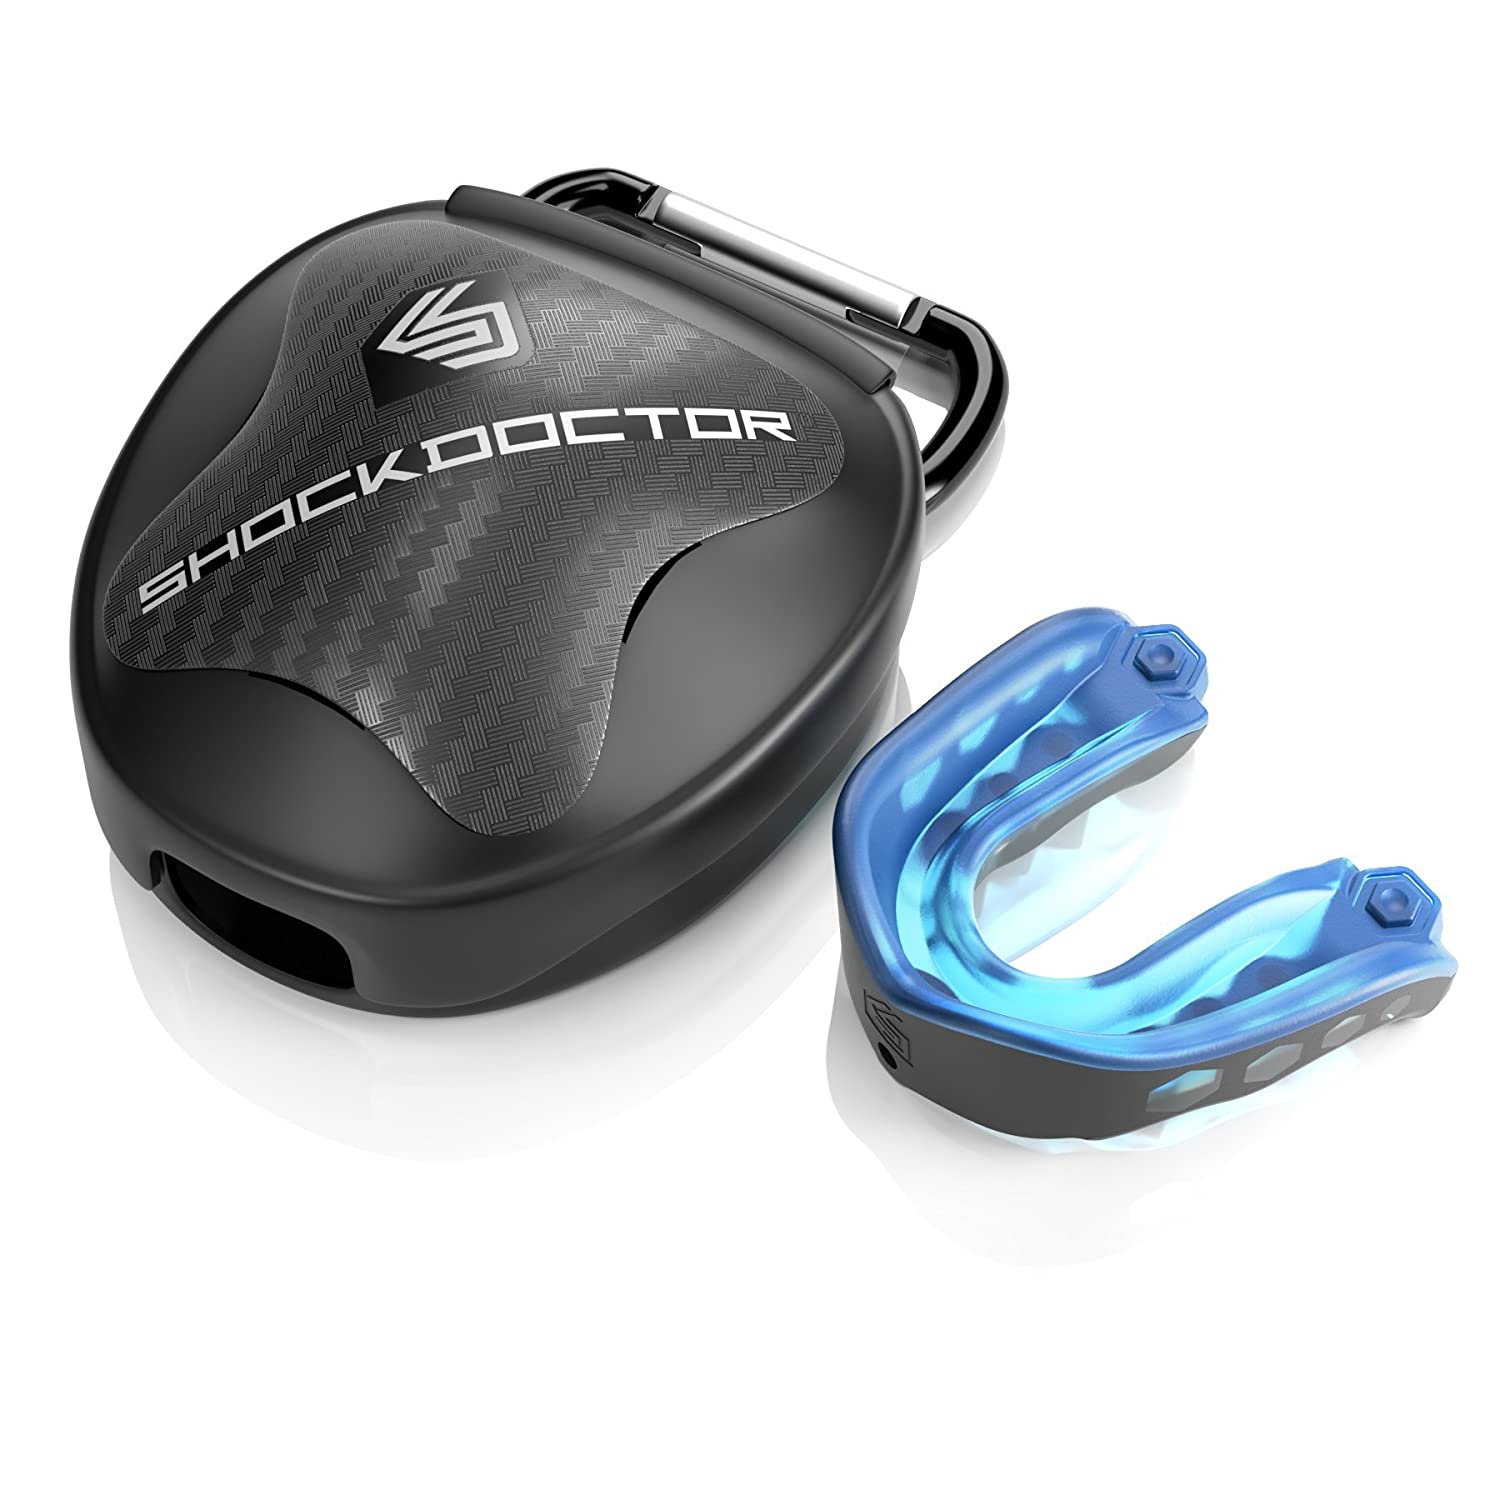 Shock Doctor Mouthguard: #1 Sport Mouth Guard - Gel Max Mouthguard & Case Combo for Football,